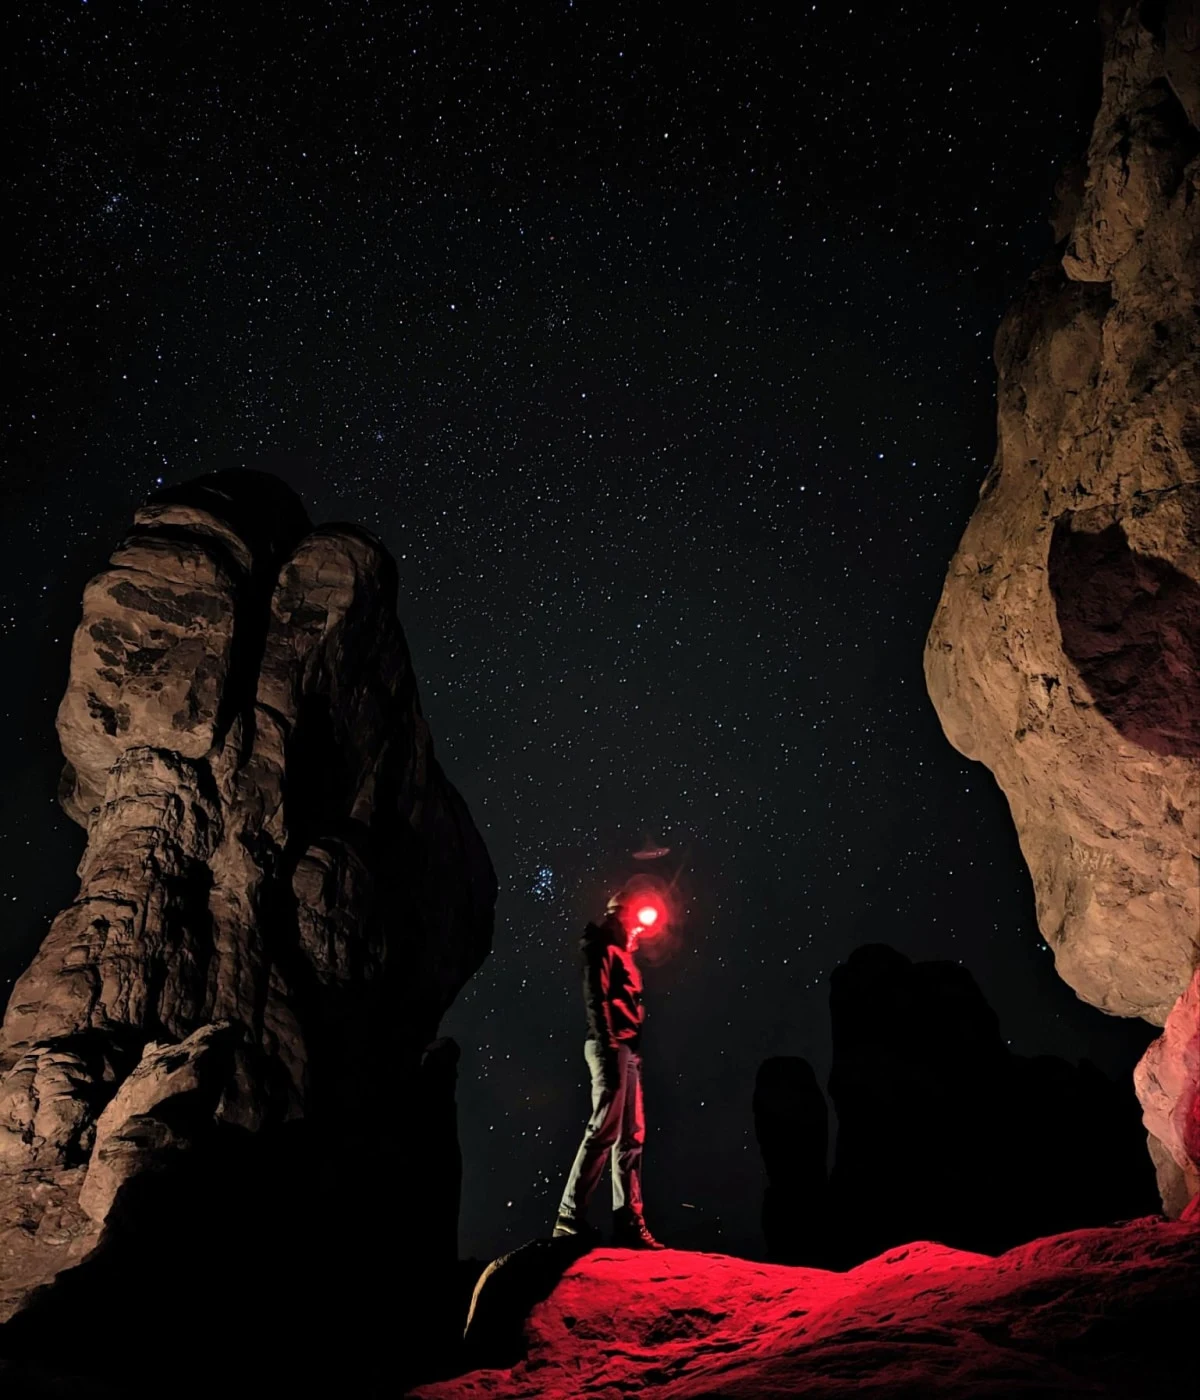 A photo of a person standing among red rocks at night time. Despite the low light conditions, the photo contains brilliant detail.